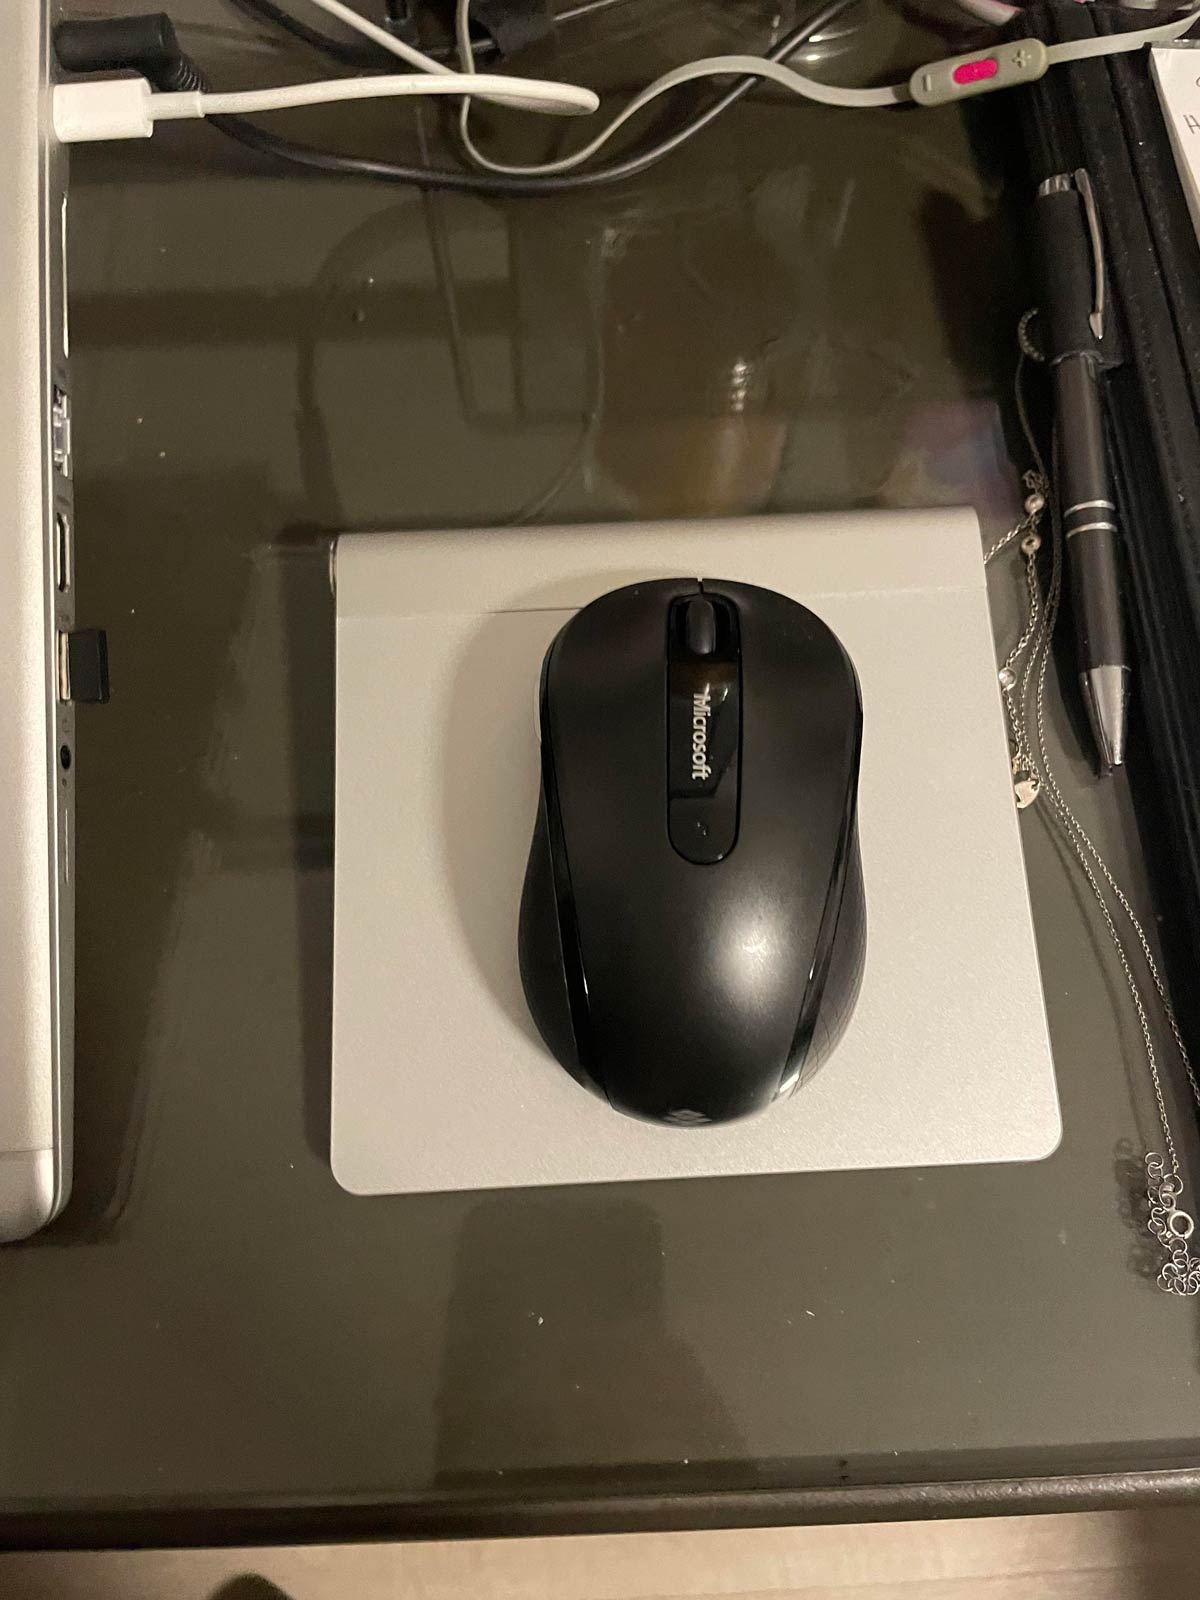 Having been given it as a gift but unsure of what it does, my mother used her $140 apple trackpad as a mousepad